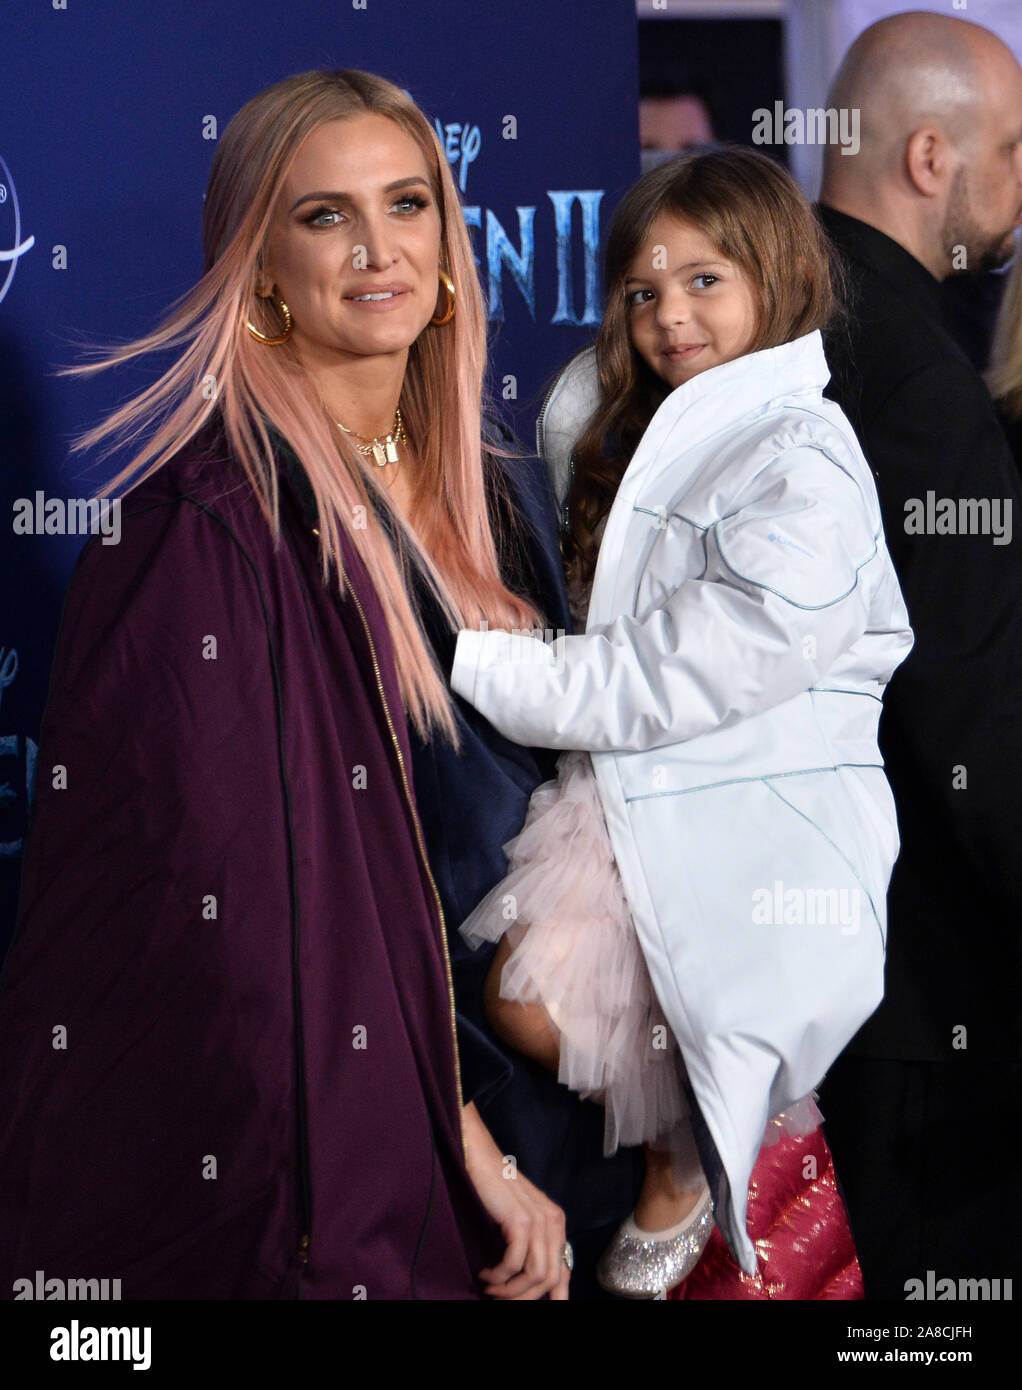 Los Angeles, United States. 07th Nov, 2019. Ashlee Simpson and her daughter Jagger Snow Ross attend the premiere of the animated musical comedy 'Frozen II' premiere at the Dolby Theatre in the Hollywood section of Los Angeles on Thursday, November 7, 2019. Storyline: Anna, Elsa, Kristoff, Olaf and Sven leave Arendelle to travel to an ancient, autumn-bound forest of an enchanted land. They set out to find the origin of Elsa's powers in order to save their kingdom. Photo by Jim Ruymen/UPI Credit: UPI/Alamy Live News Stock Photo